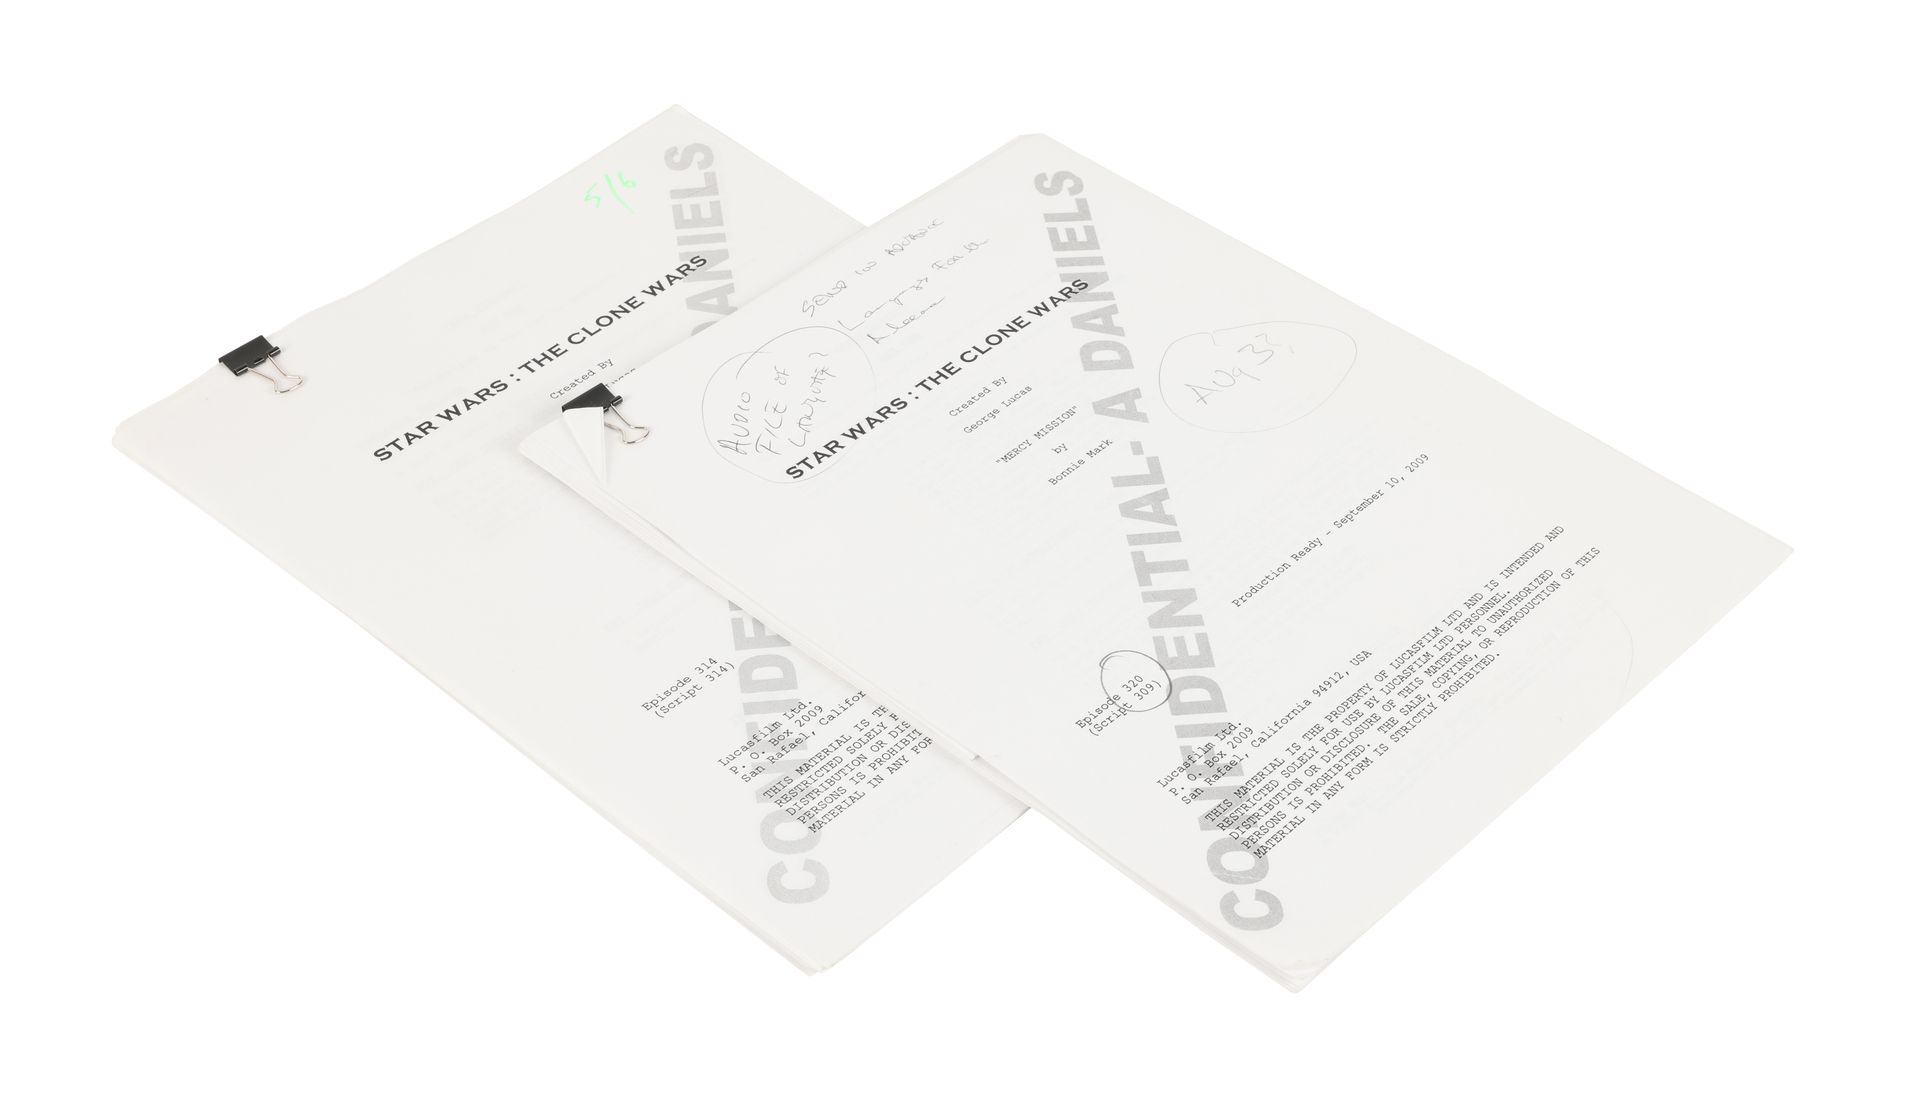 STAR WARS: THE CLONE WARS (2008-2020) - Anthony Daniels Collection: Pair of Anthony Daniels' Scripts - Image 2 of 12